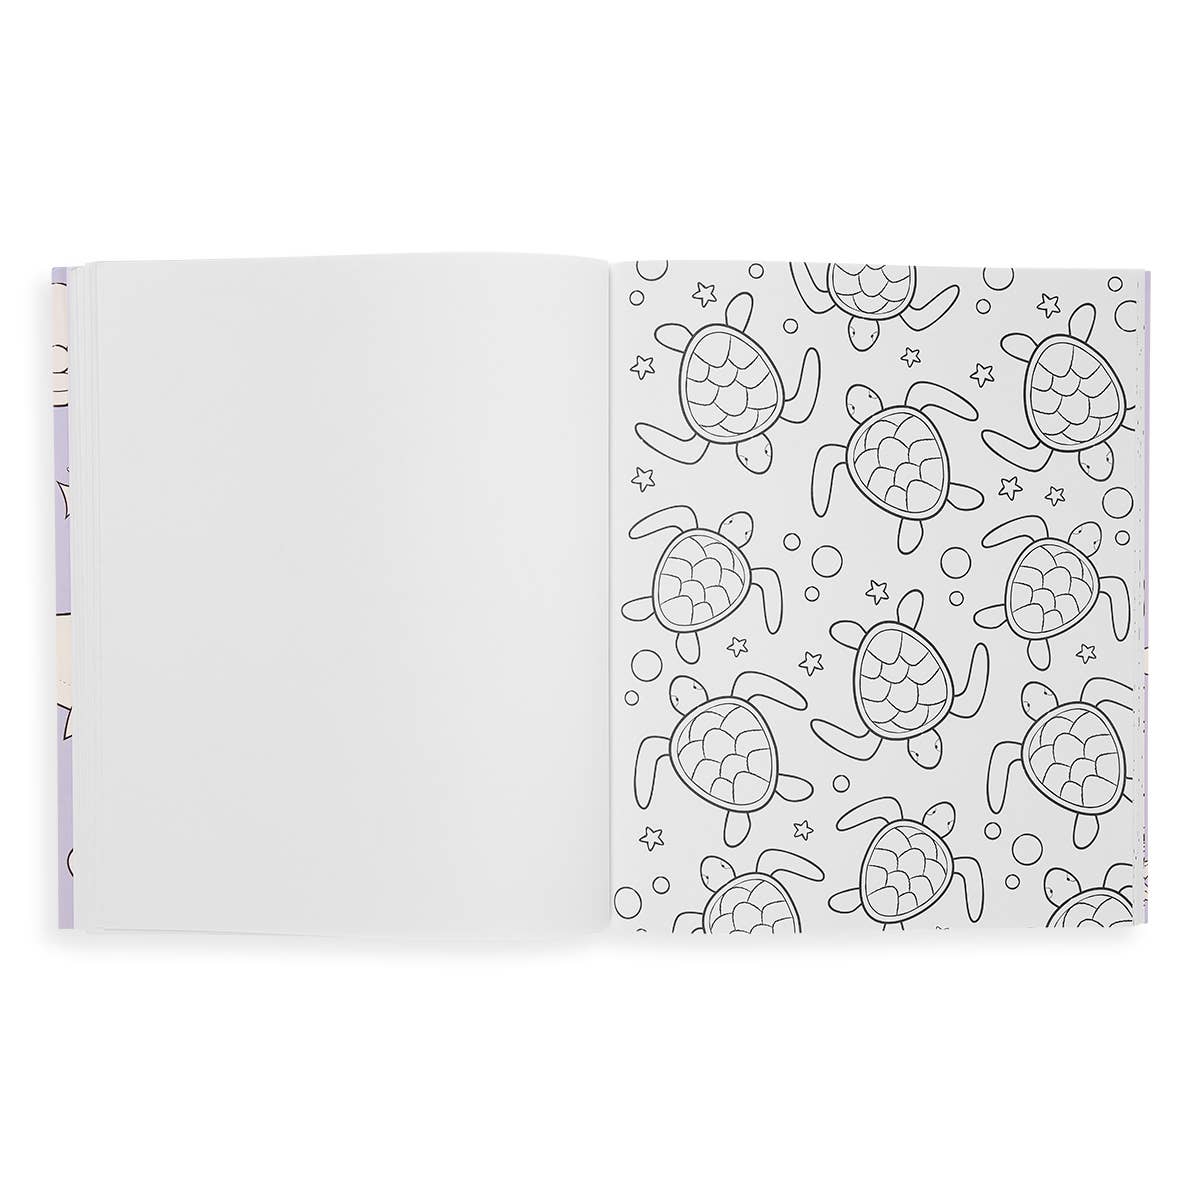 Ooly Art supplies Color-in' Book: Outrageous Ocean - Little Birdies